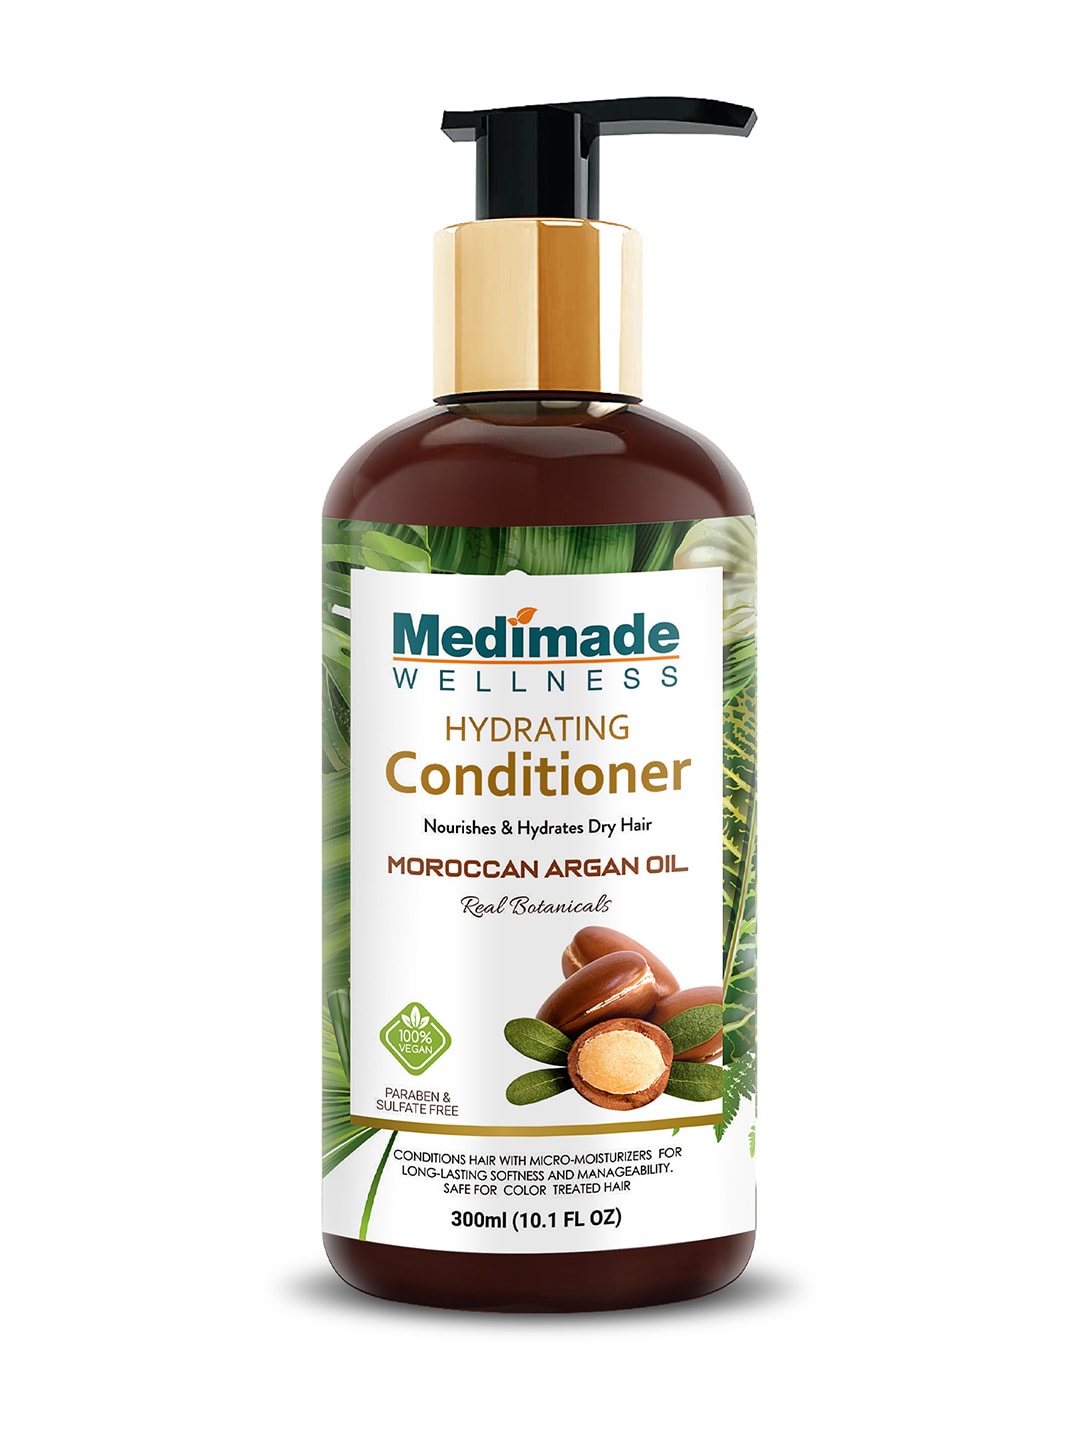 Medimade Hydrating Conditioner with Moroccan Argan Oil - 300 ml Price in India